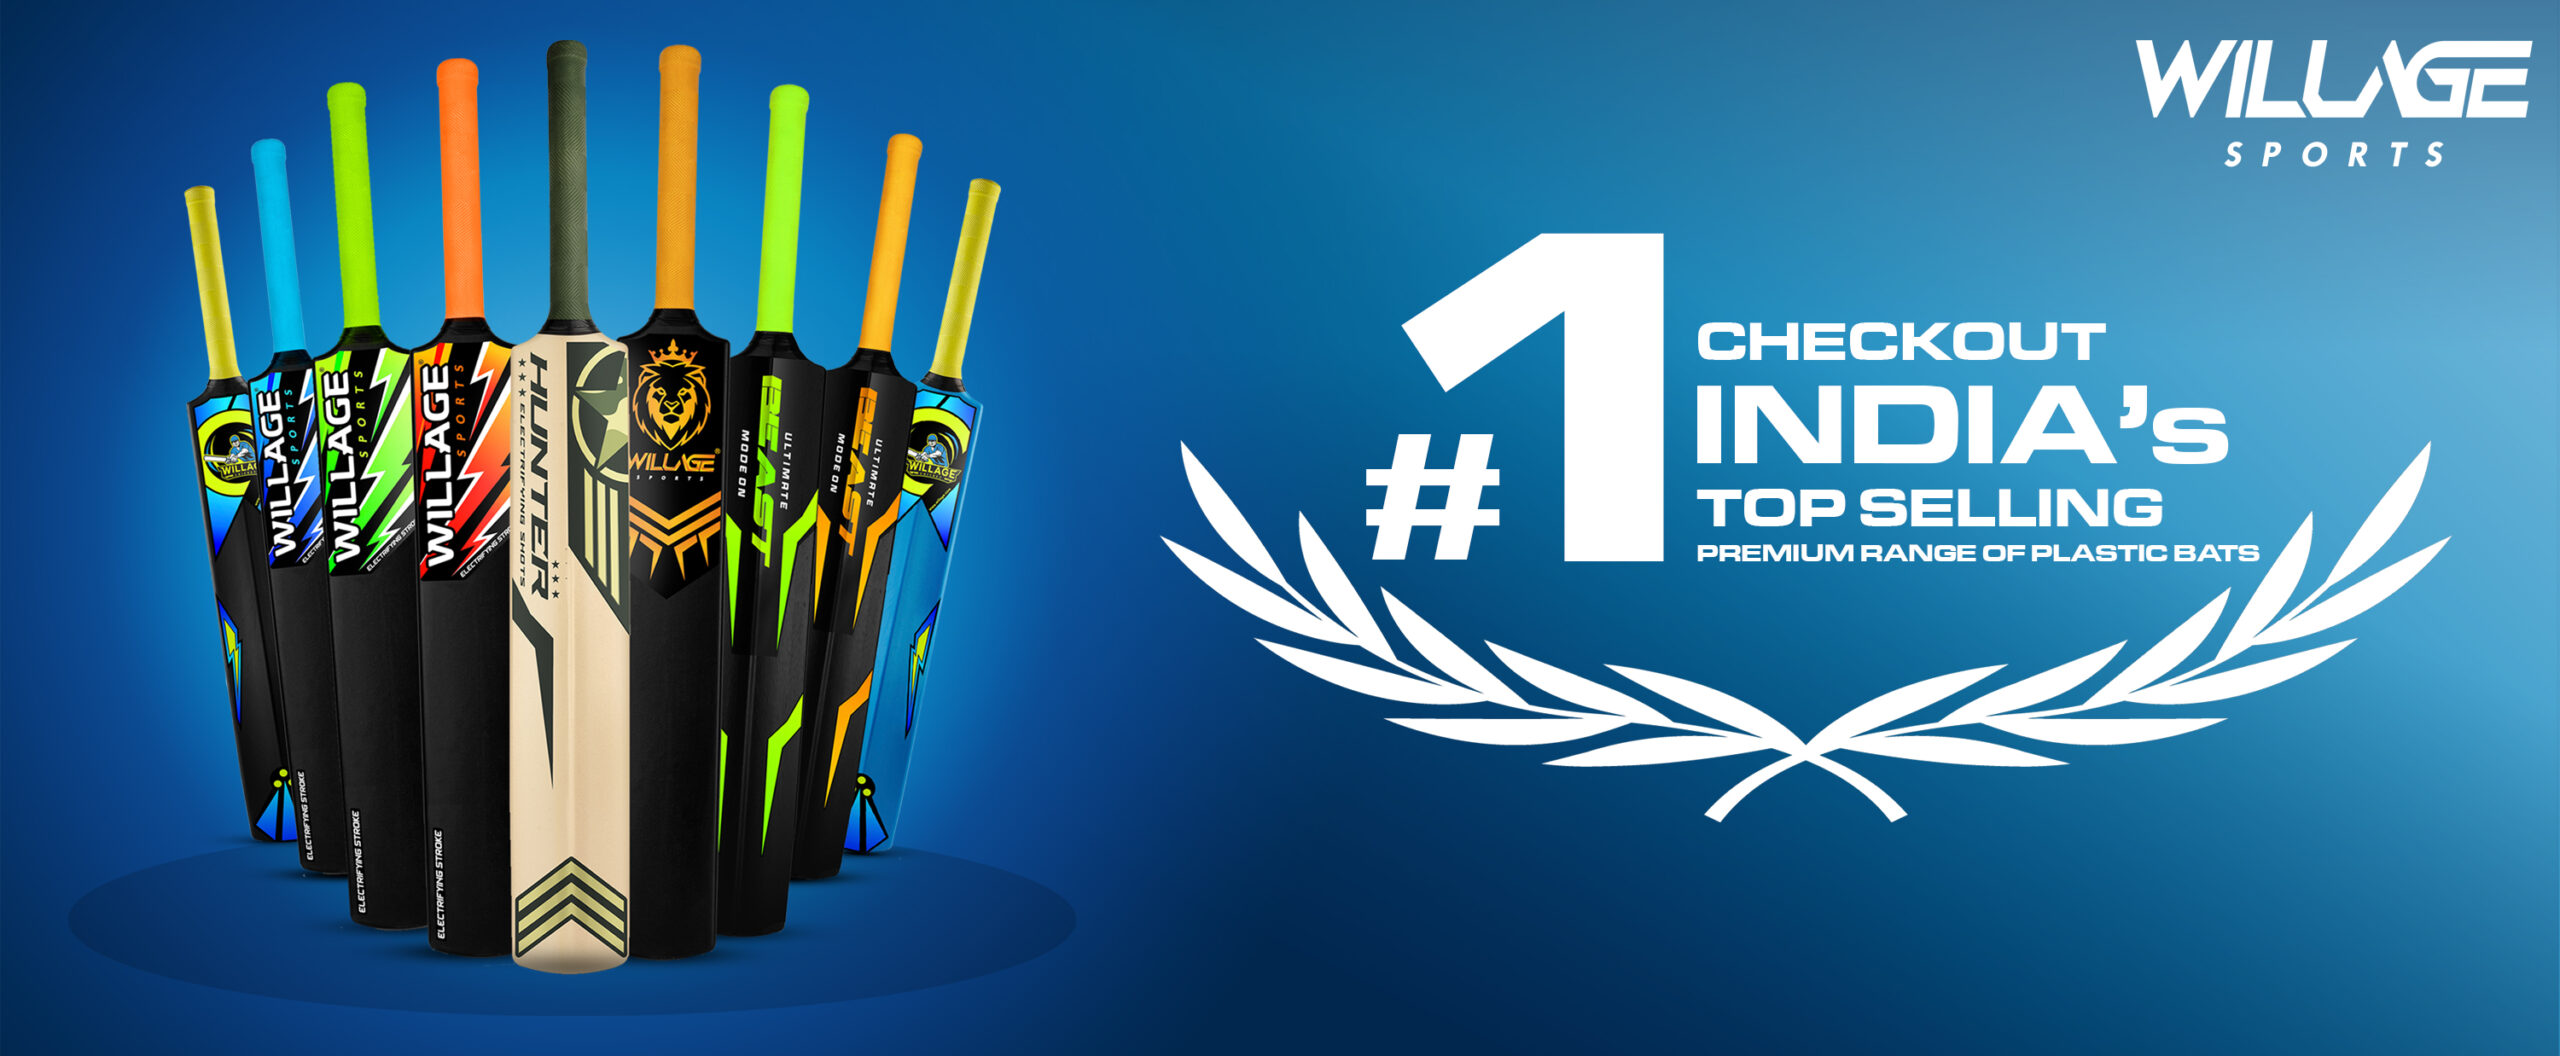 Checkout India's Top selling Range of Plastic Cricket Bats